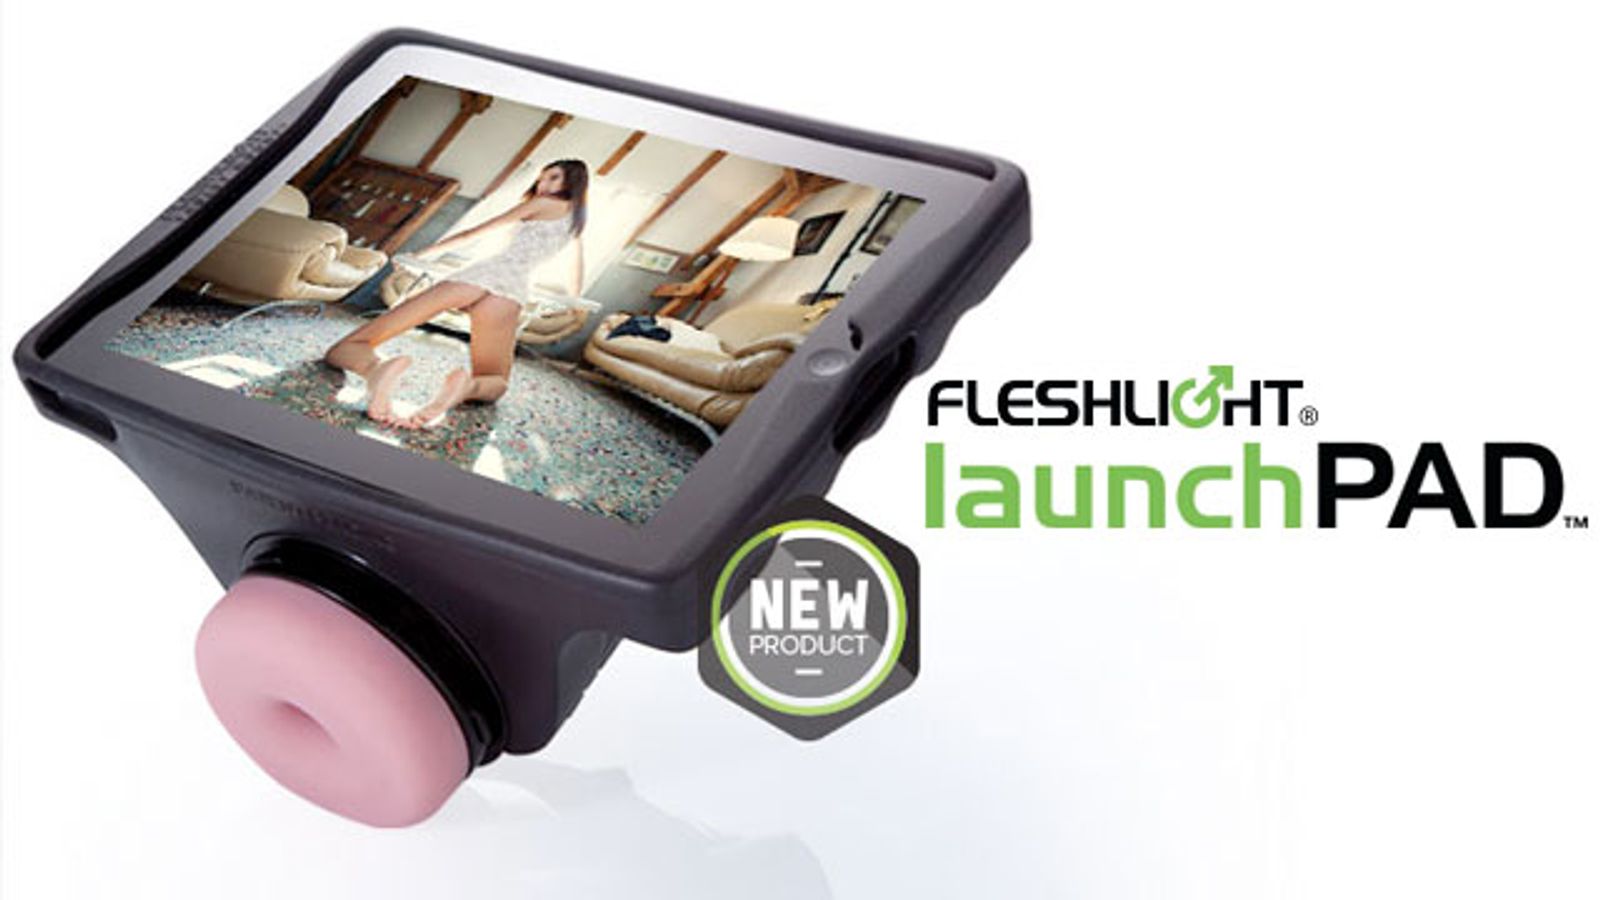 Fleshlight LaunchPAD Offers Fresh POV on Adult Content